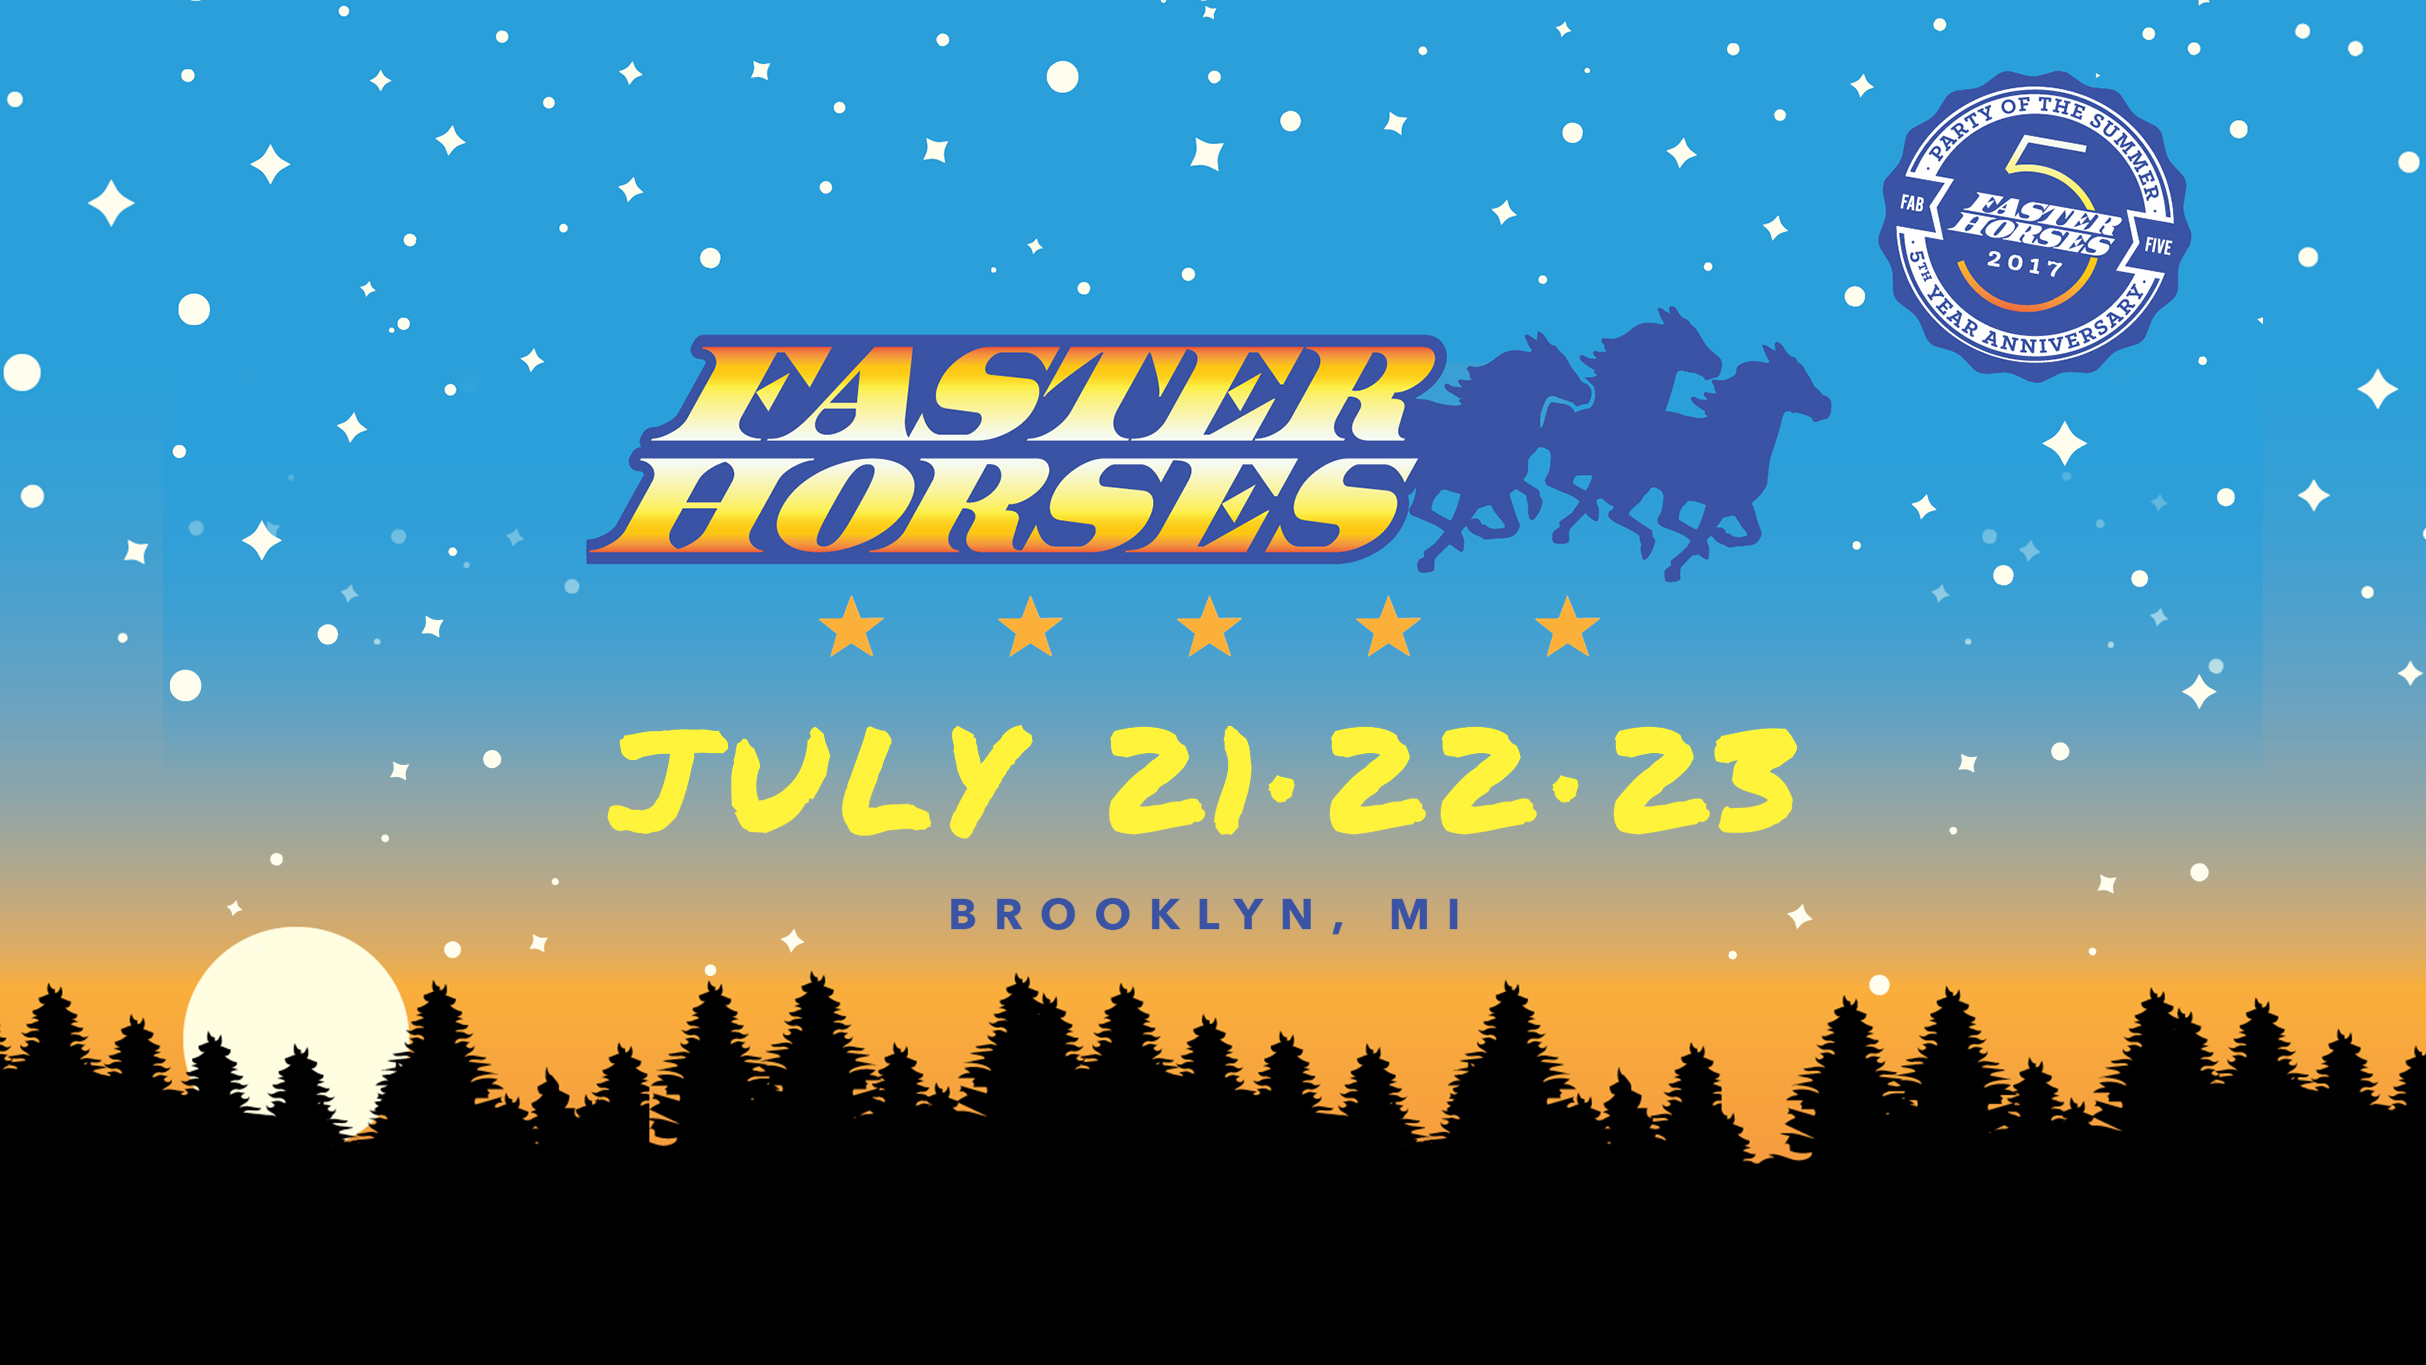 Faster Horses Weekend is Here! Trinity Transportation